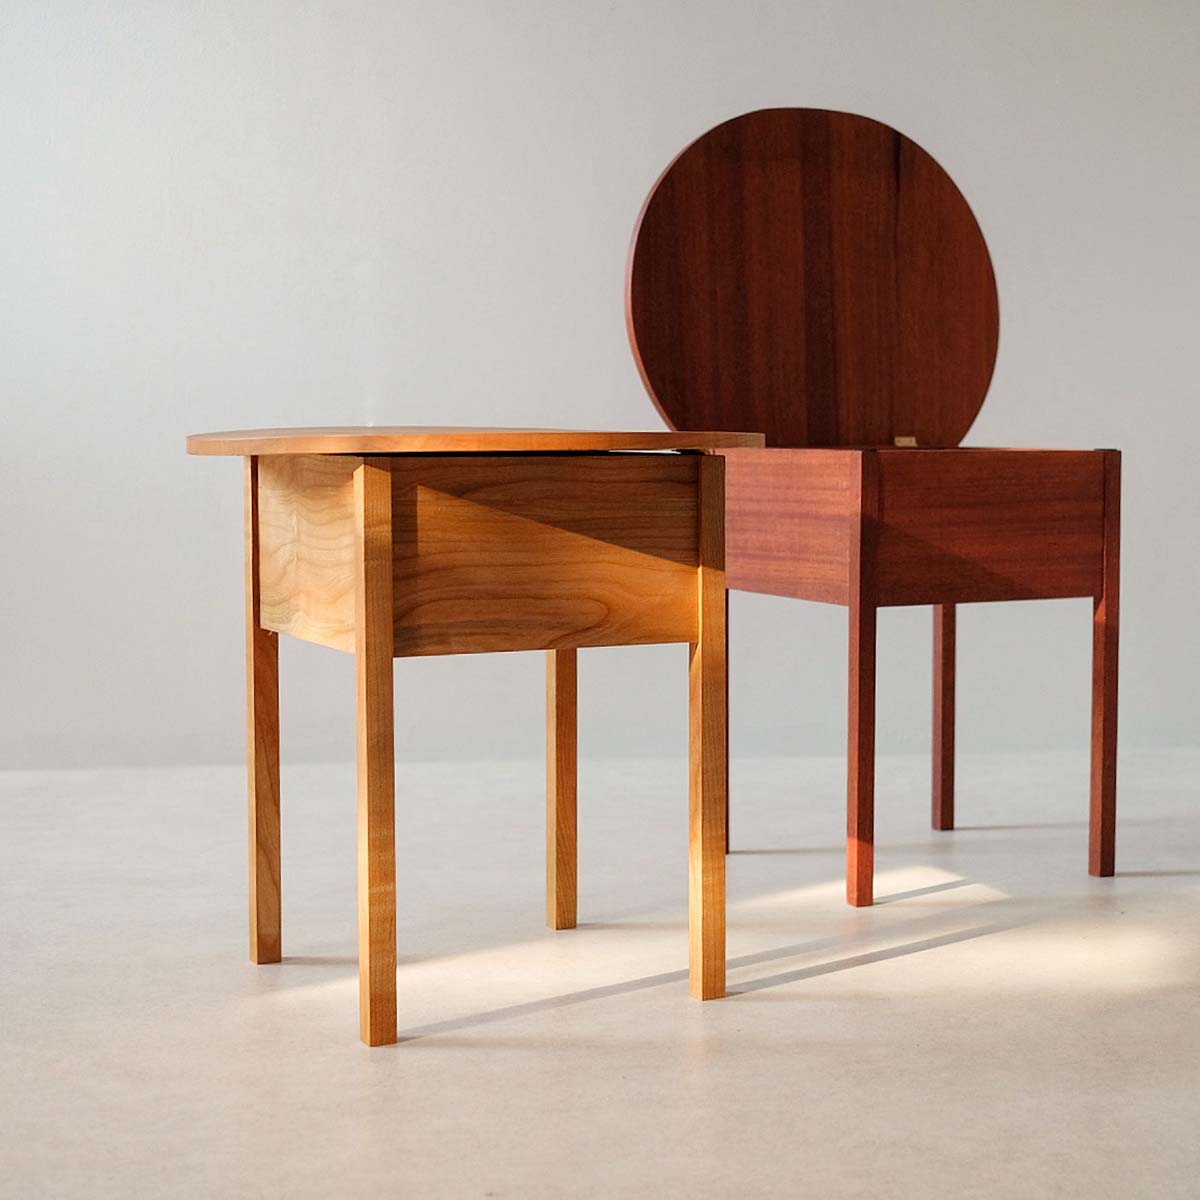 HEFT Studio Dressing Tables by Helena Robson - see her work at the Scottish Furniture Makers Exhibition.